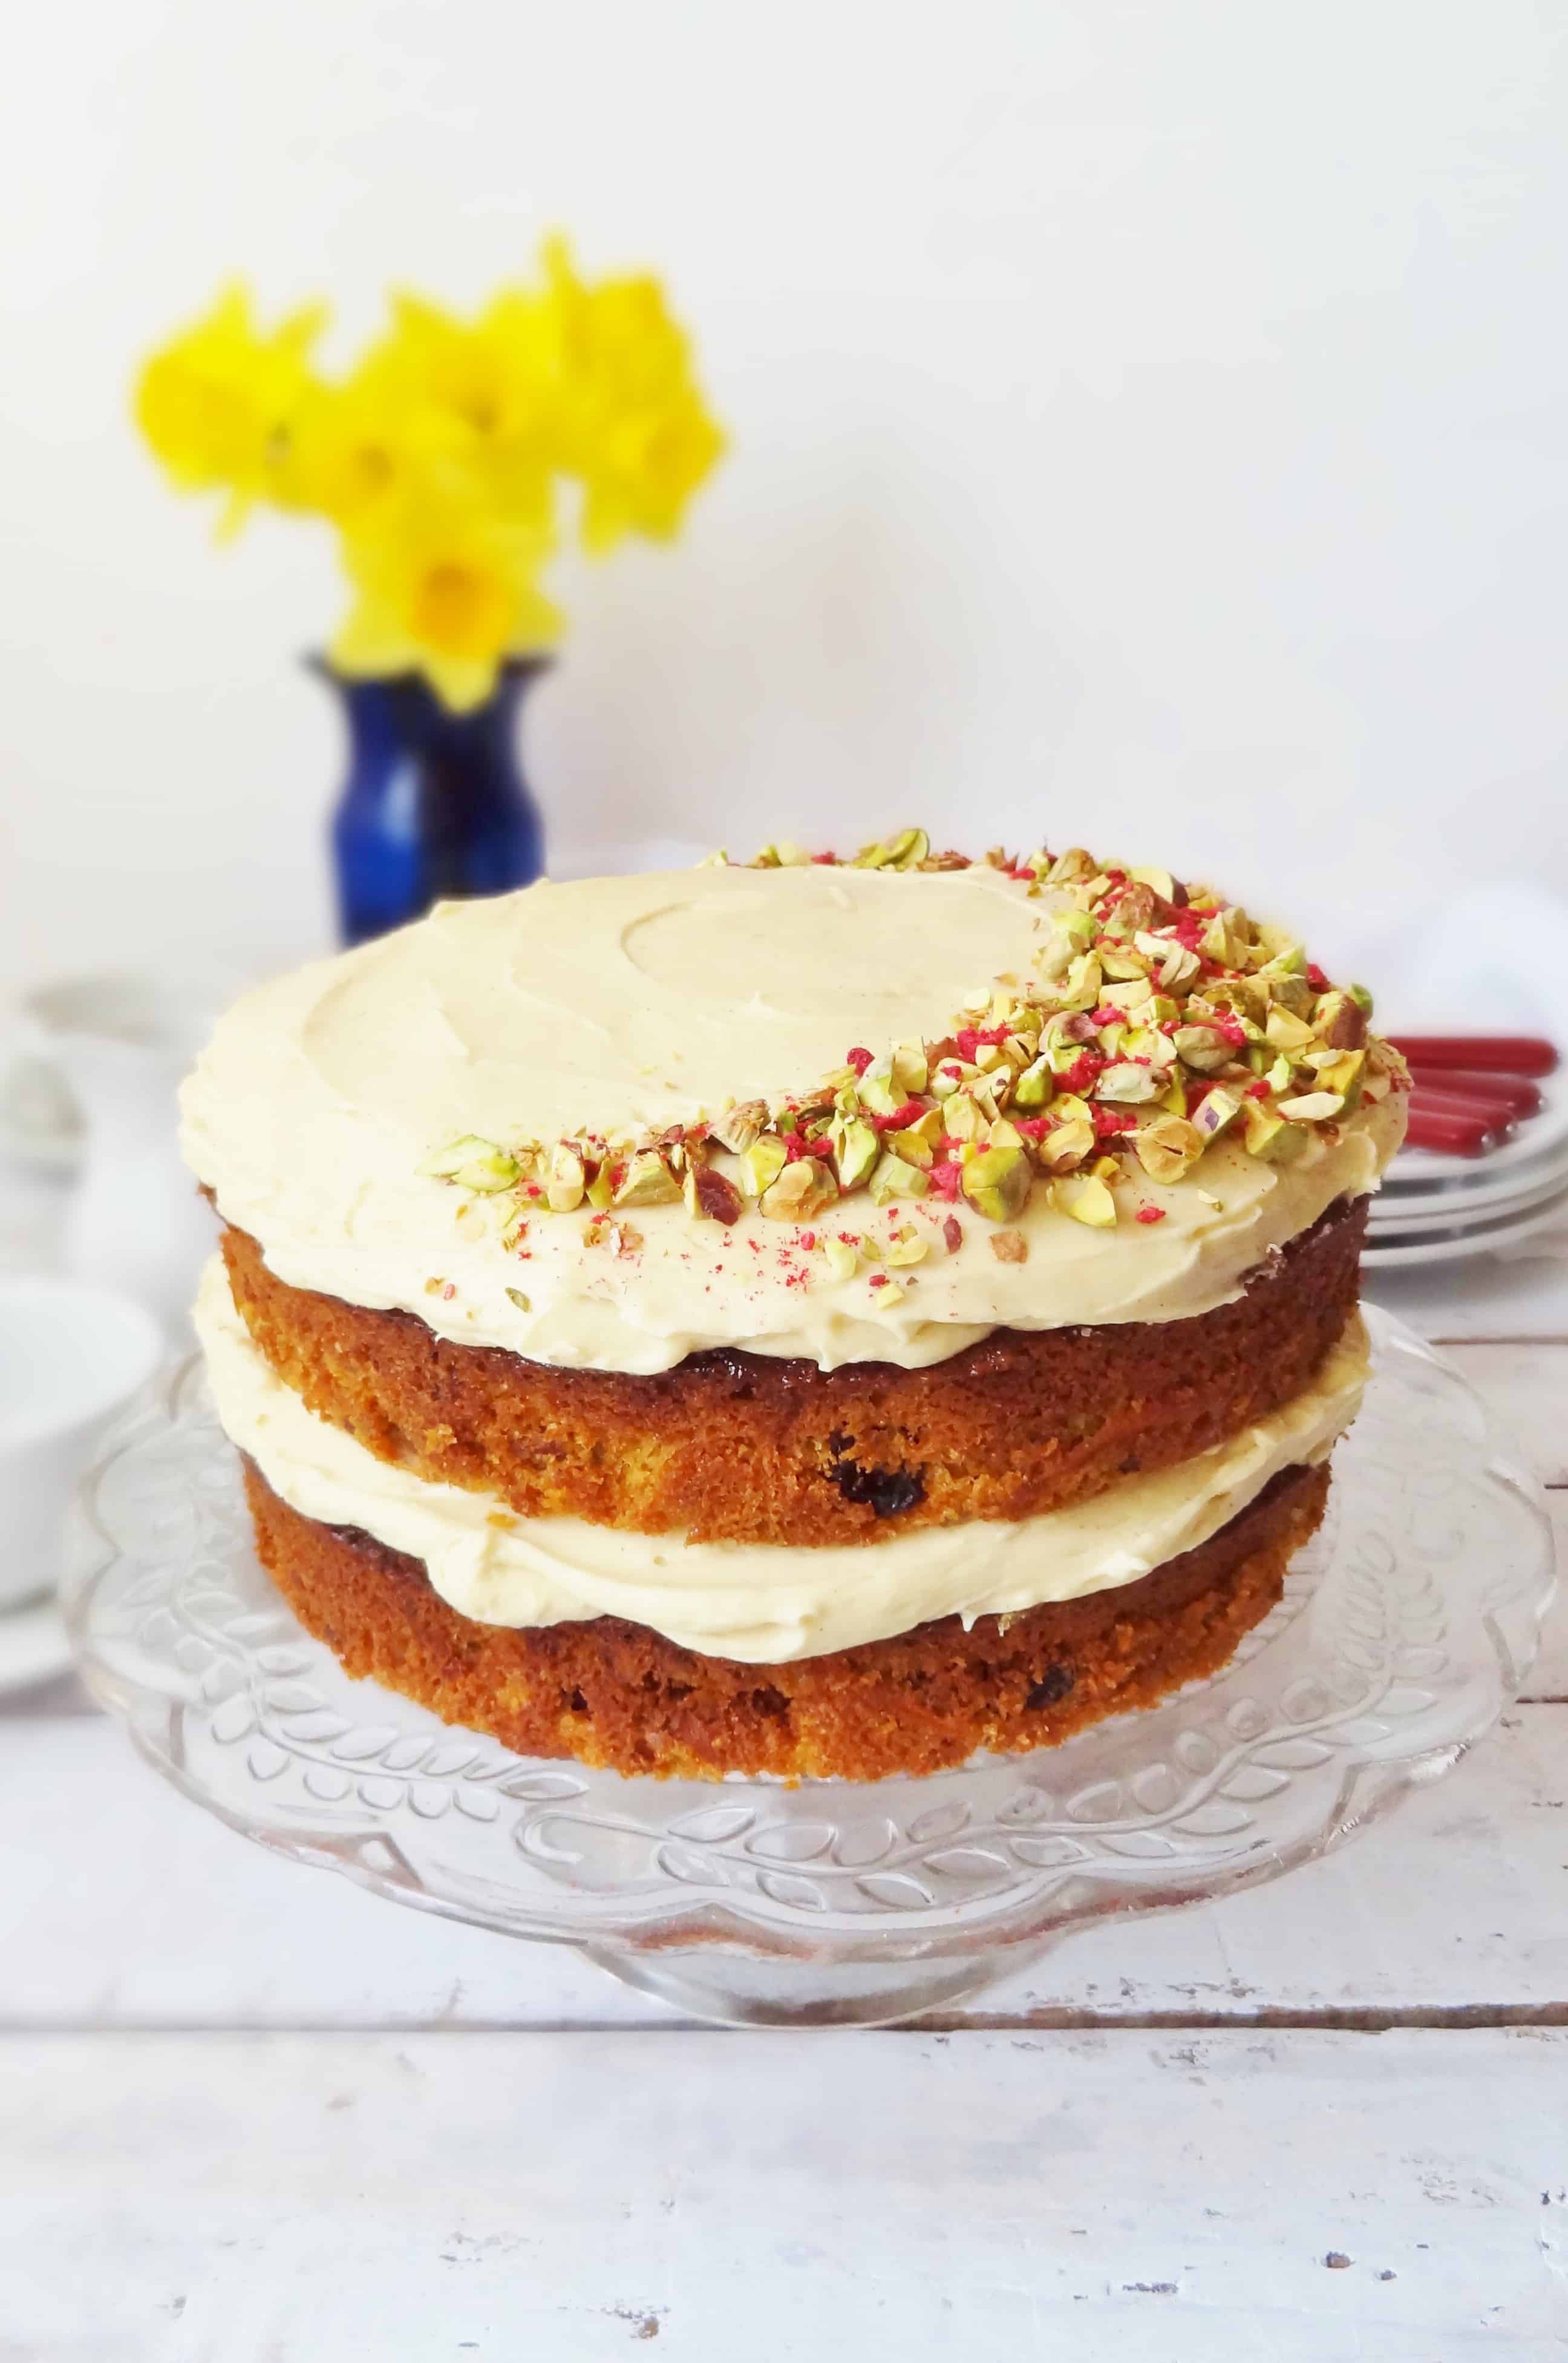 Nielsen-Massey Carrot Cake With Vanilla Bean Icing ...